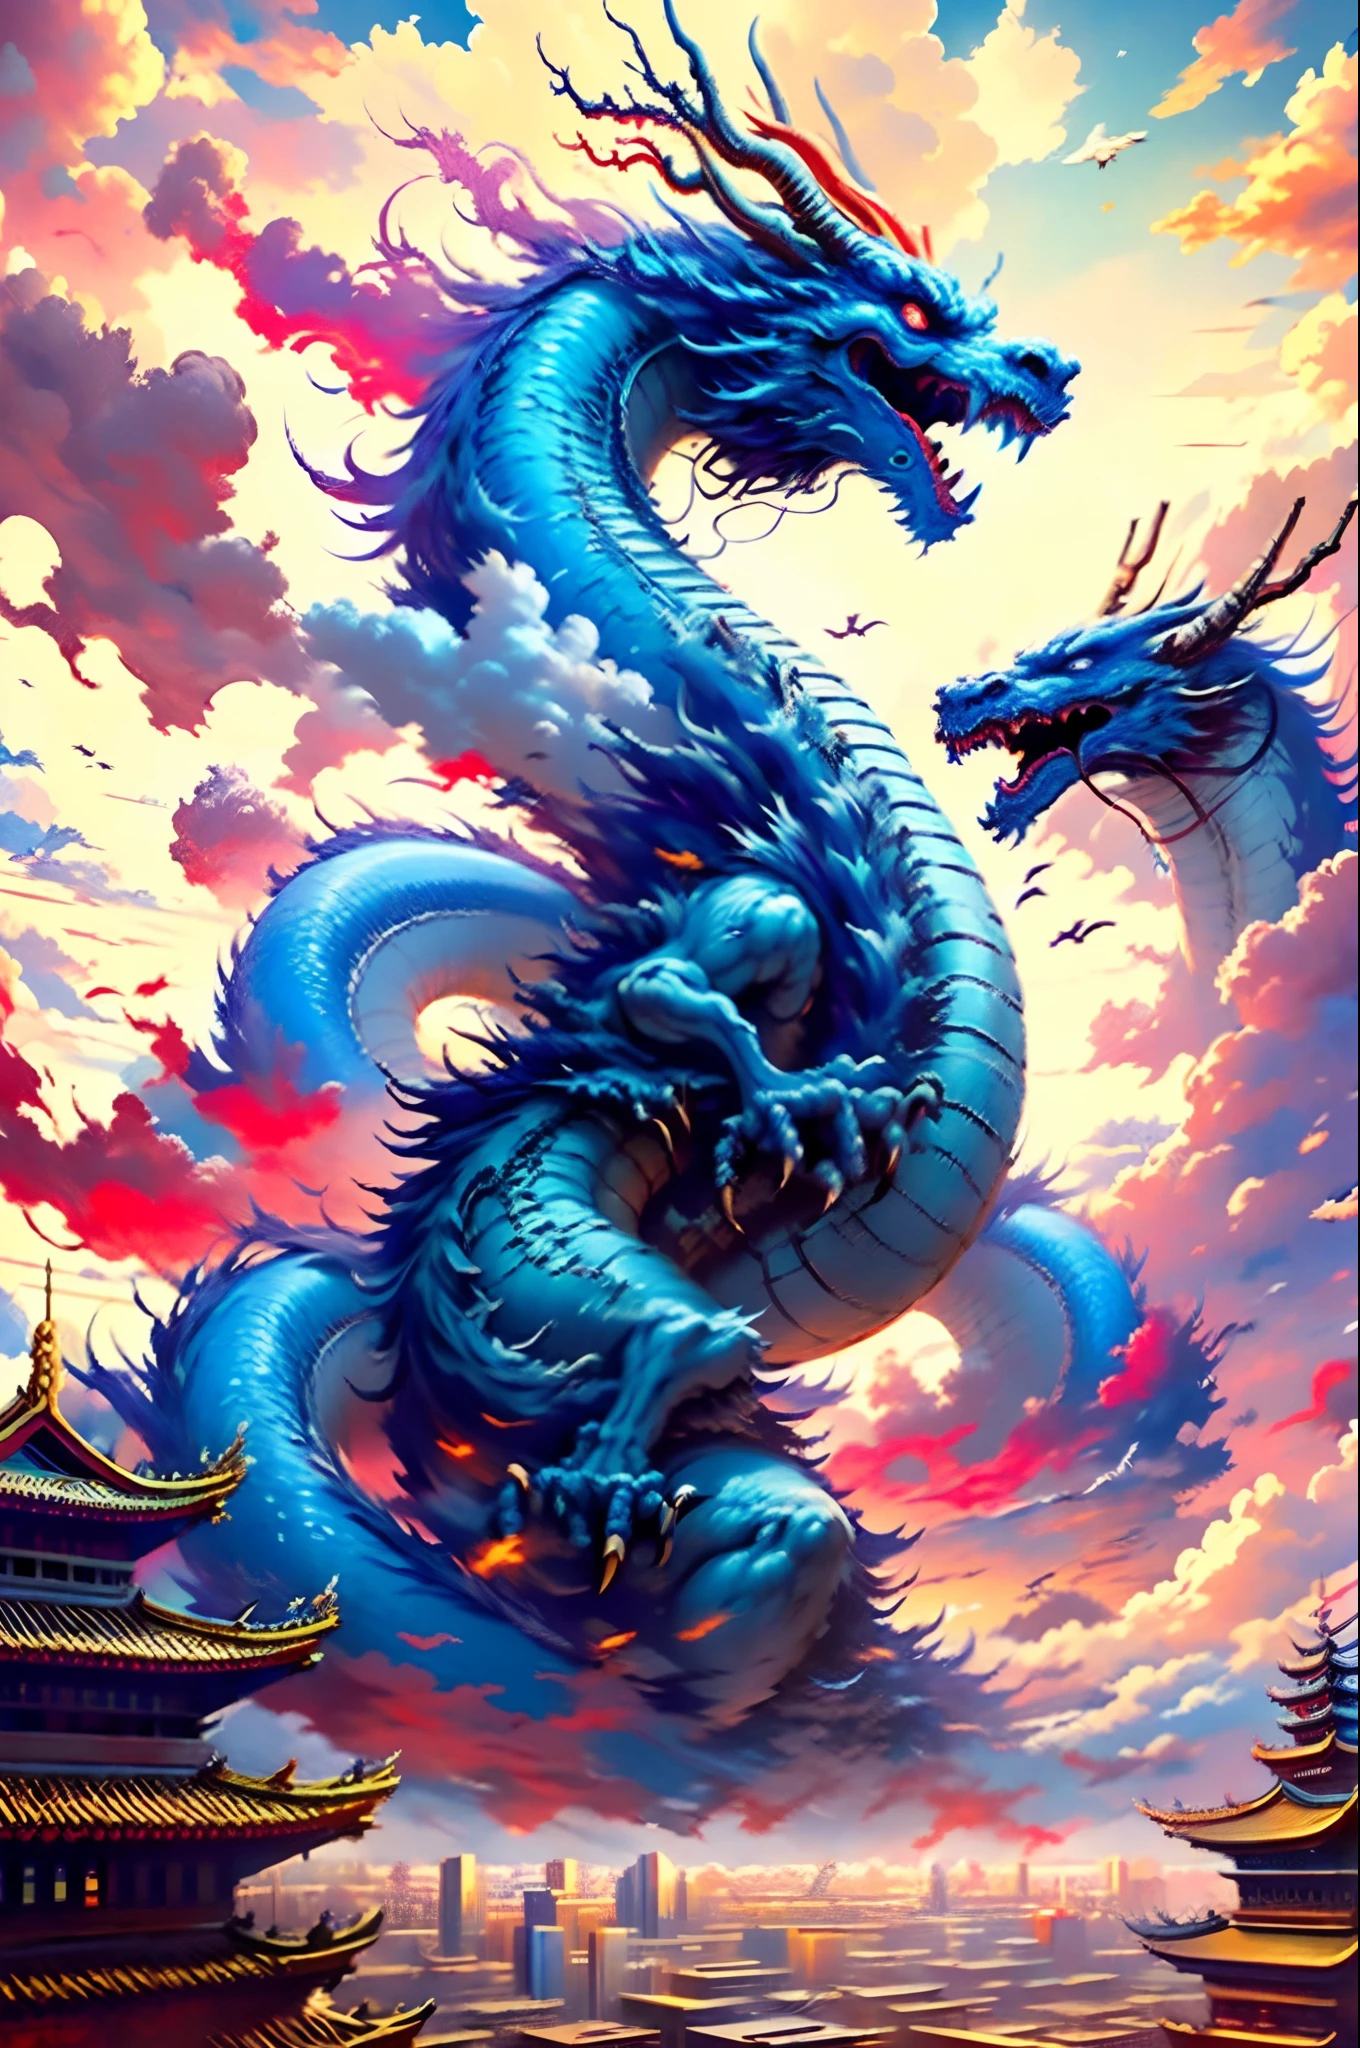 Best quality, masterpiece, ultra high res, nu no humans, (long:1.2),no humans, cloud, architecture, east asian architecture, Blue Eyes, horns, open mouth, sky, fangs, Blue eastern dragon, cloudy sky, teeth, flying, Wind, bird, wings, Cyberpunk Cityscape